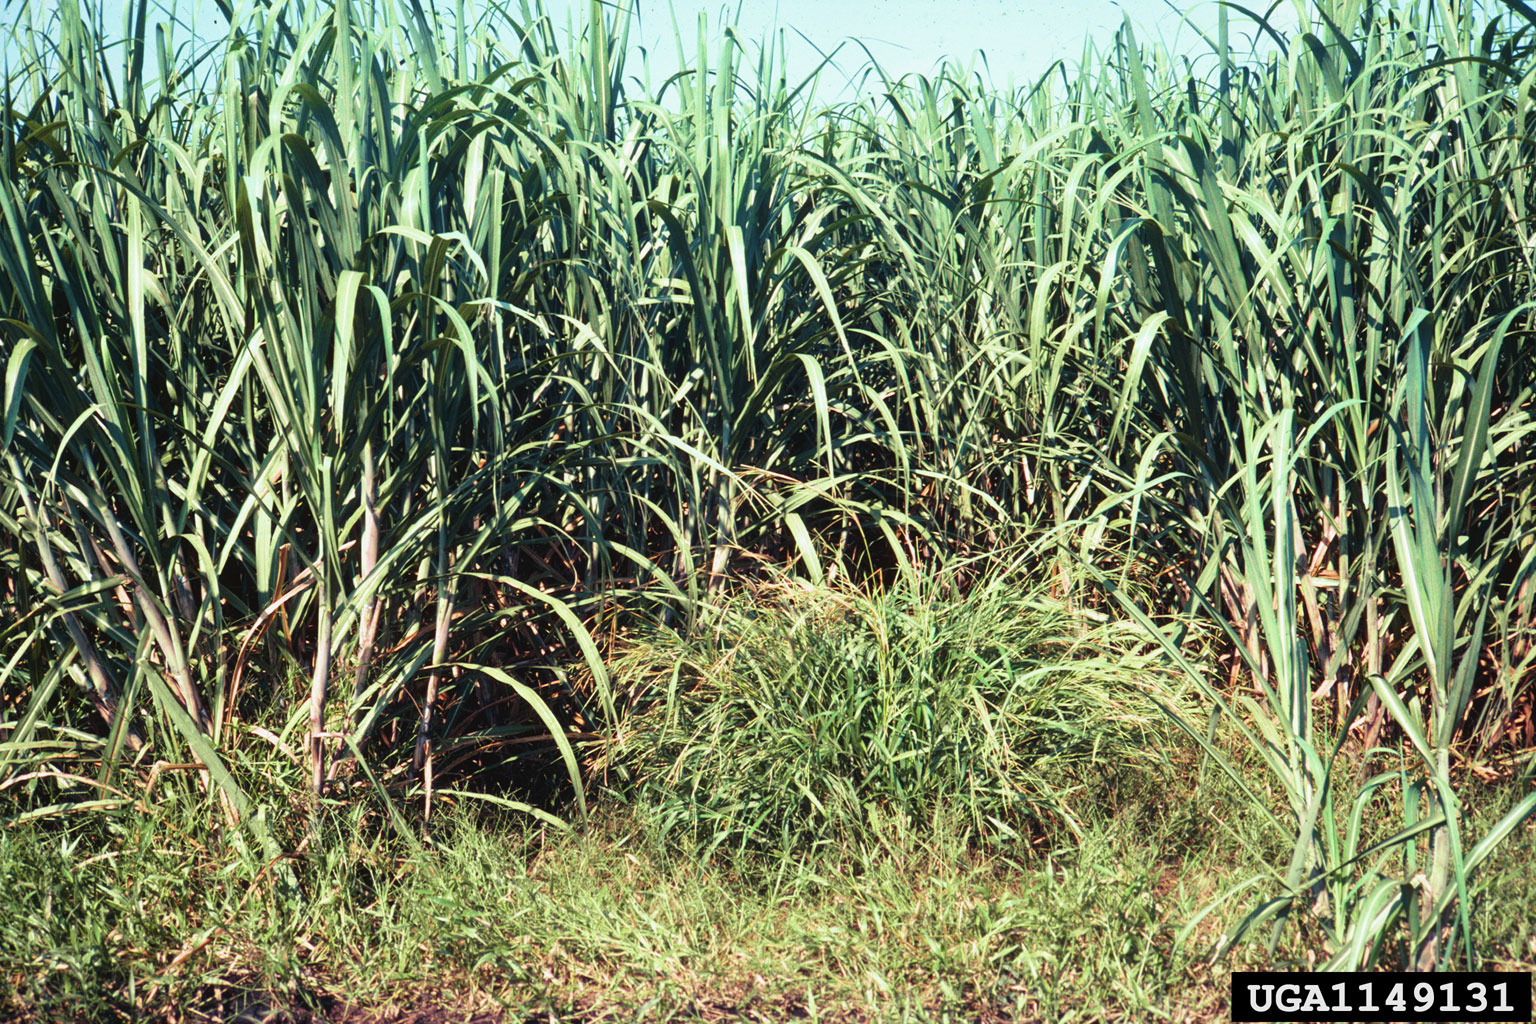 Photograph of a corn field that has been infested by itchgrass. The photo shows a field of tall corn with a shorter clump of itchgrass in the center front of the image.